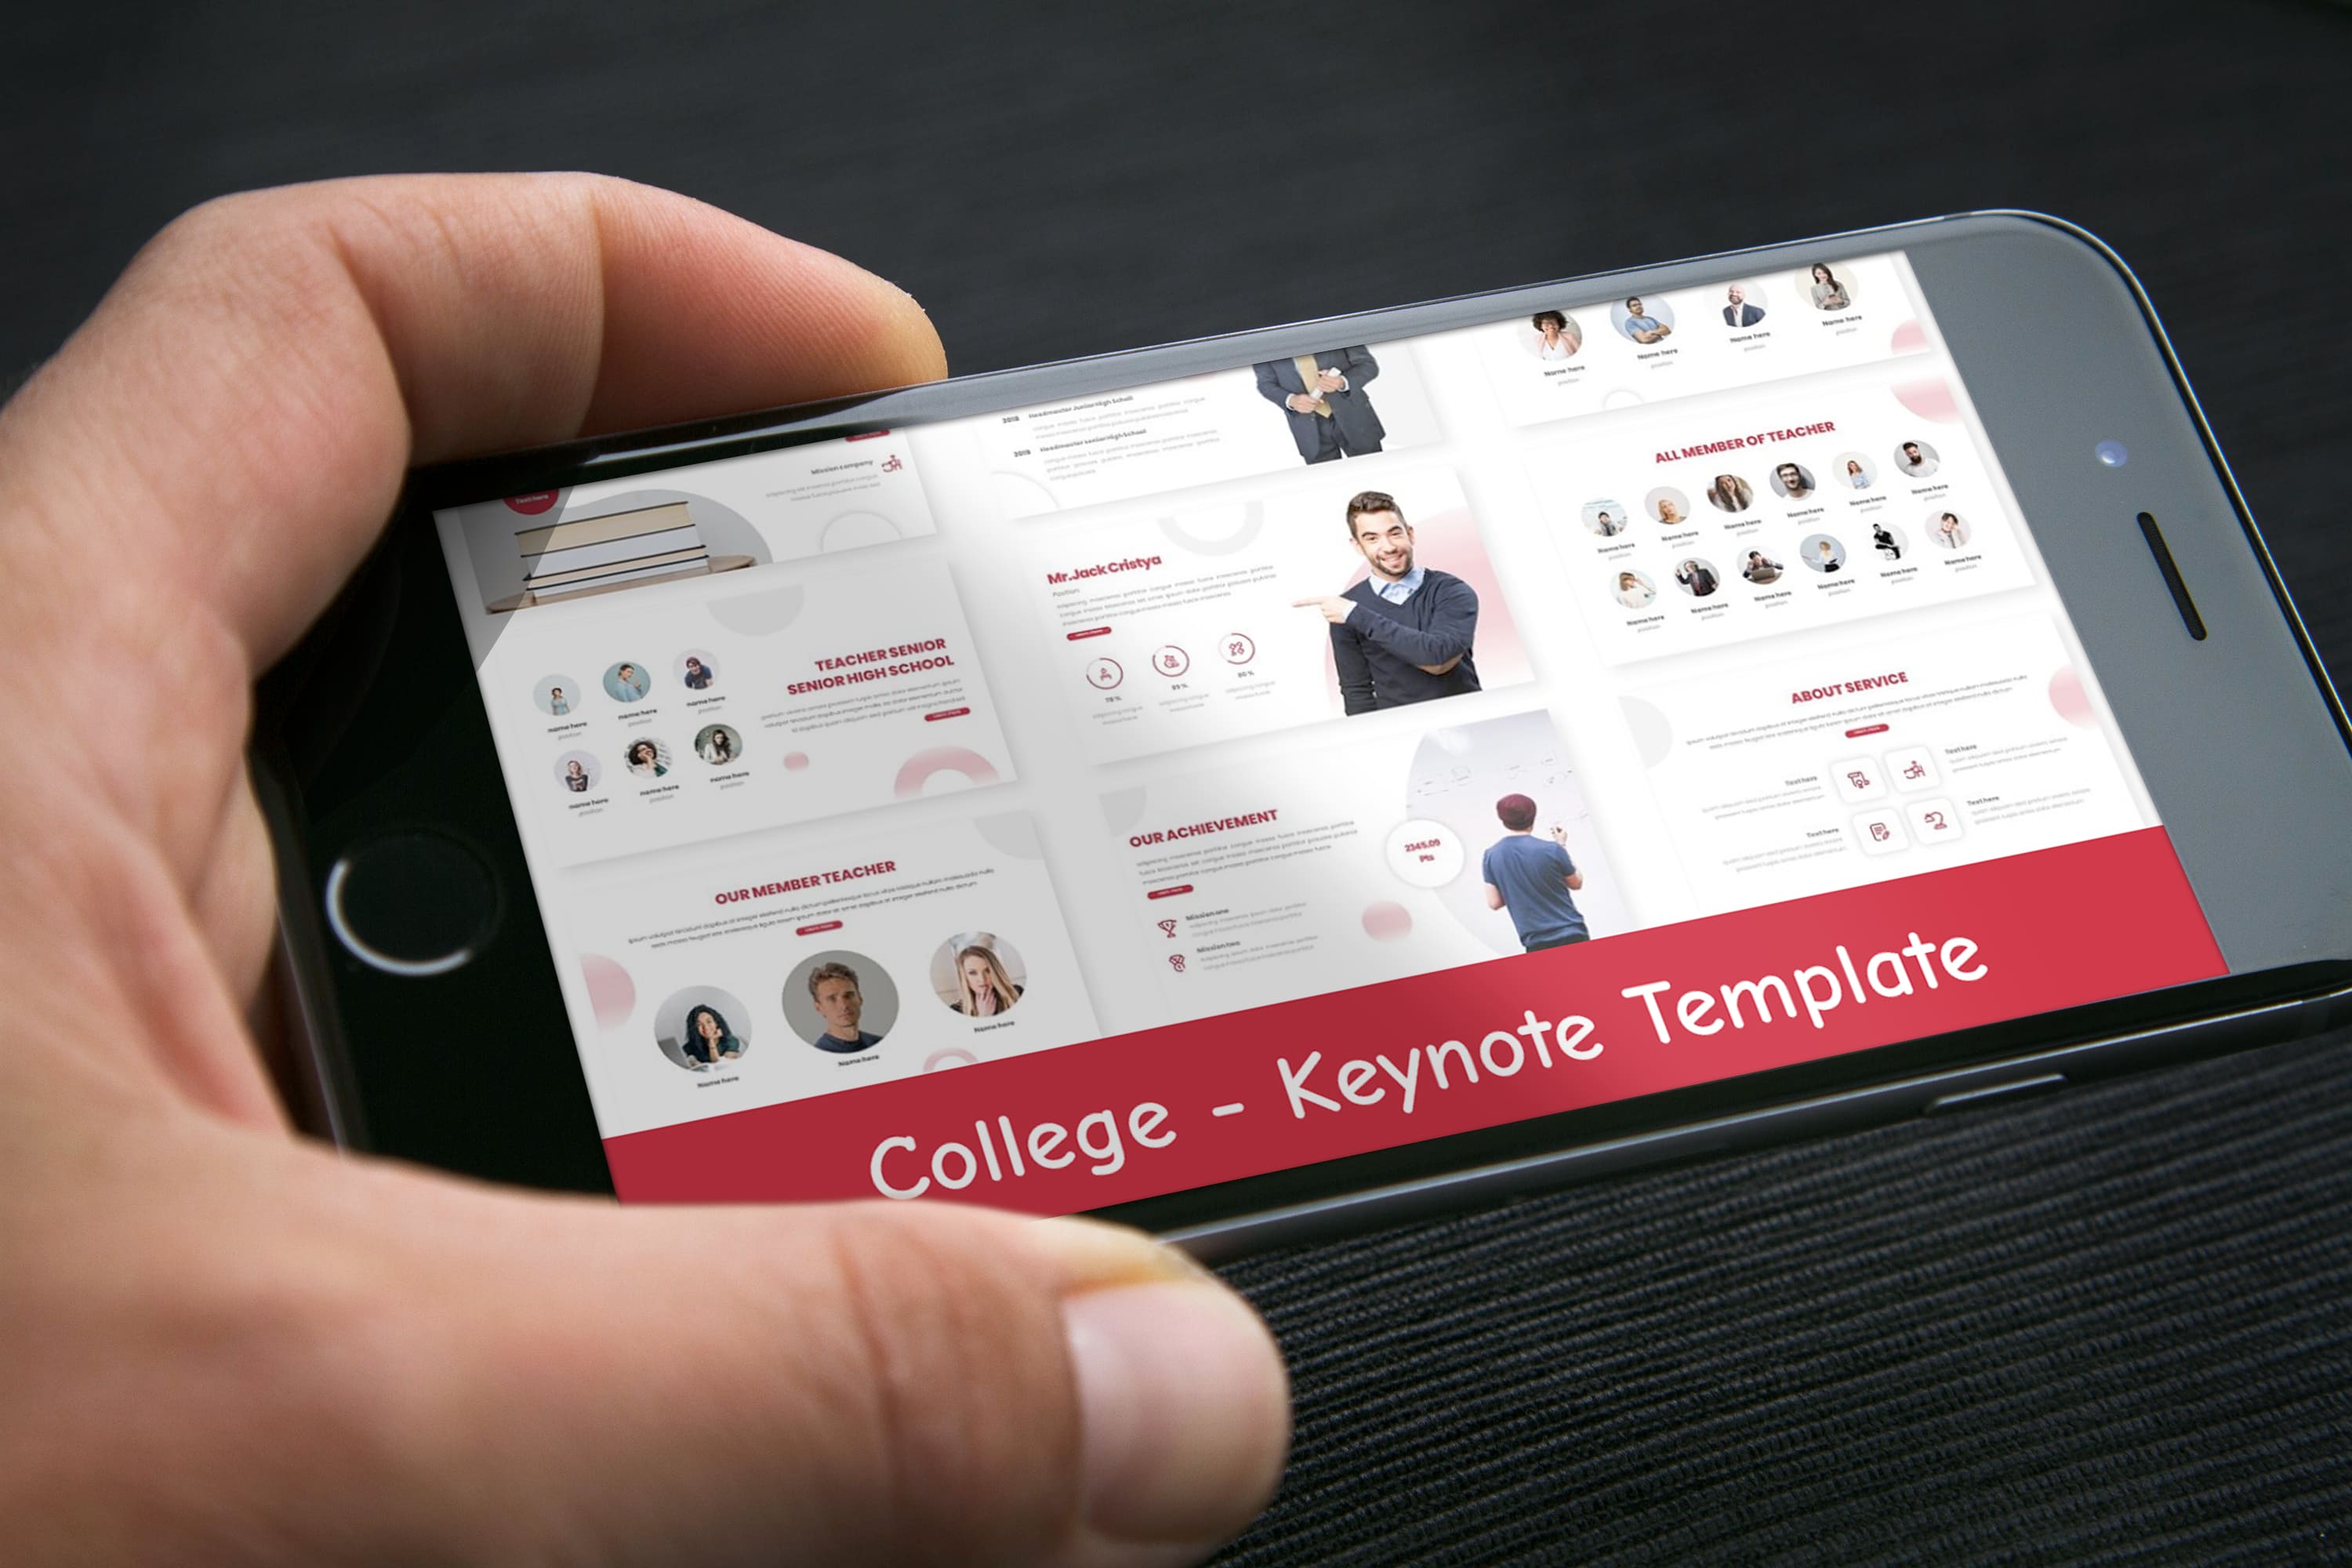 College - Keynote Template - mobile.